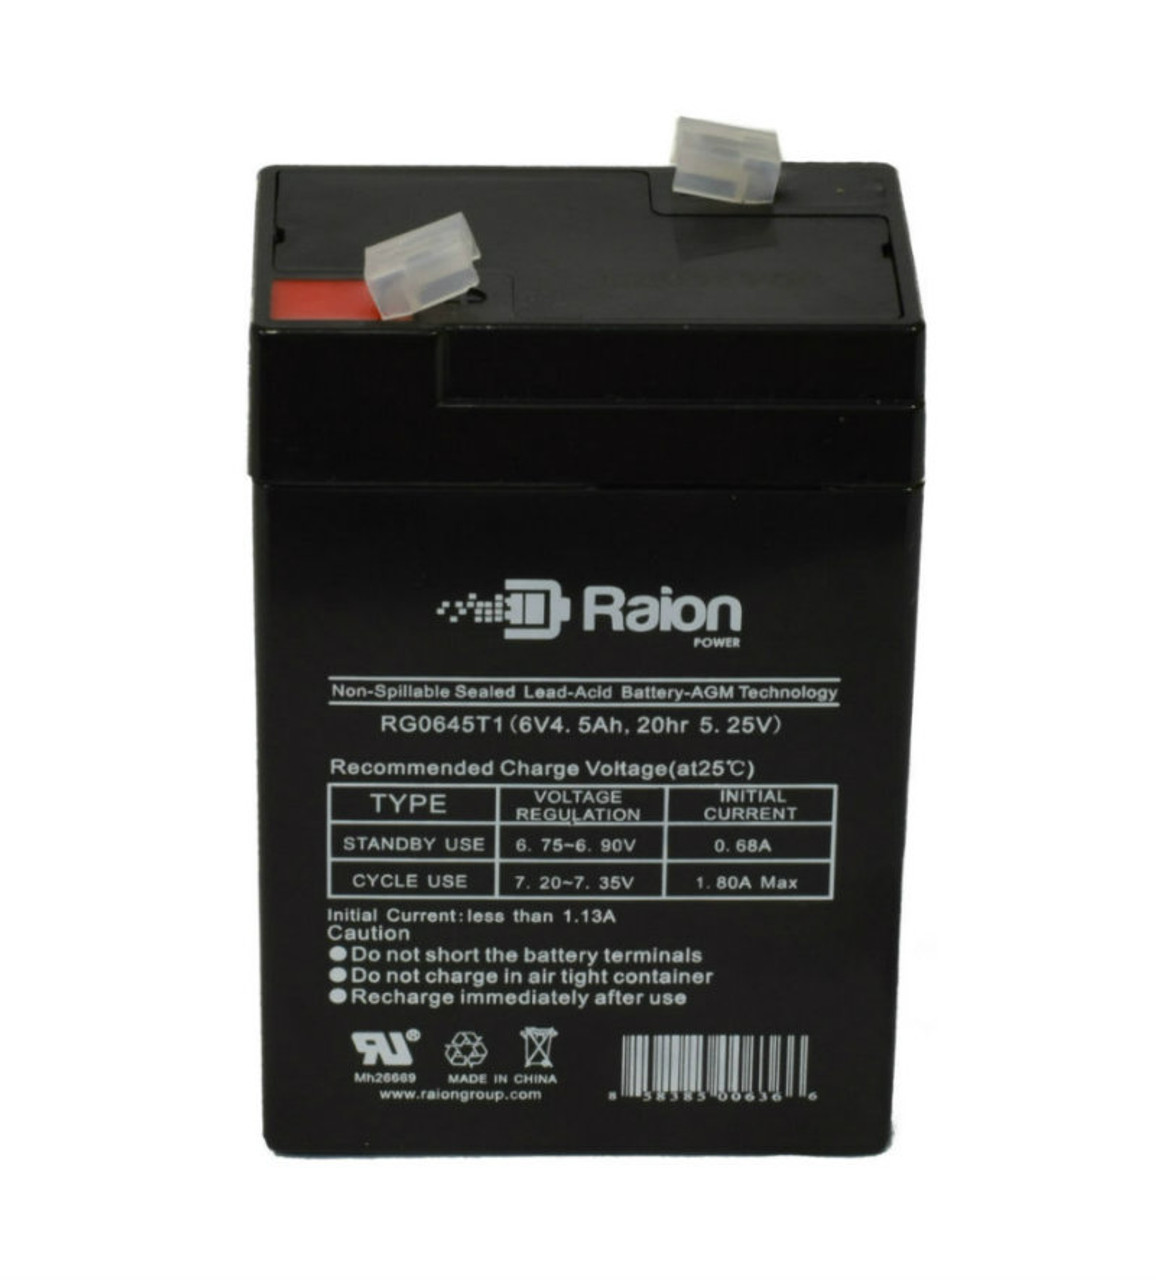 Raion Power RG0645T1 Replacement Battery Cartridge for Movin' Goose Decoys Greenhead Gear 220114